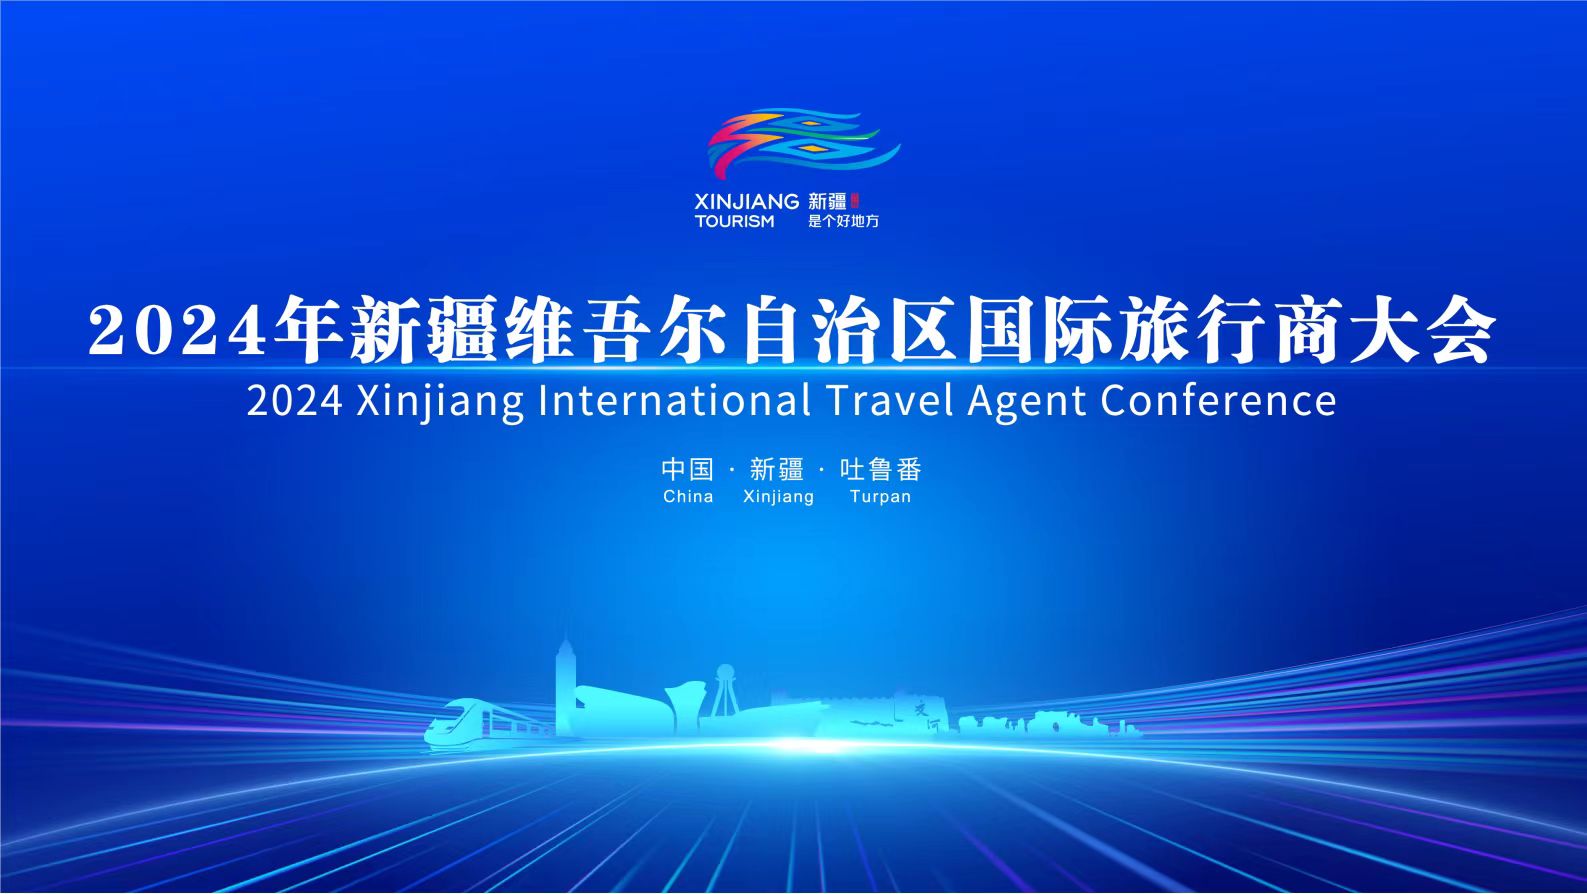 Live: 2024 Xinjiang International Travel Agent Conference